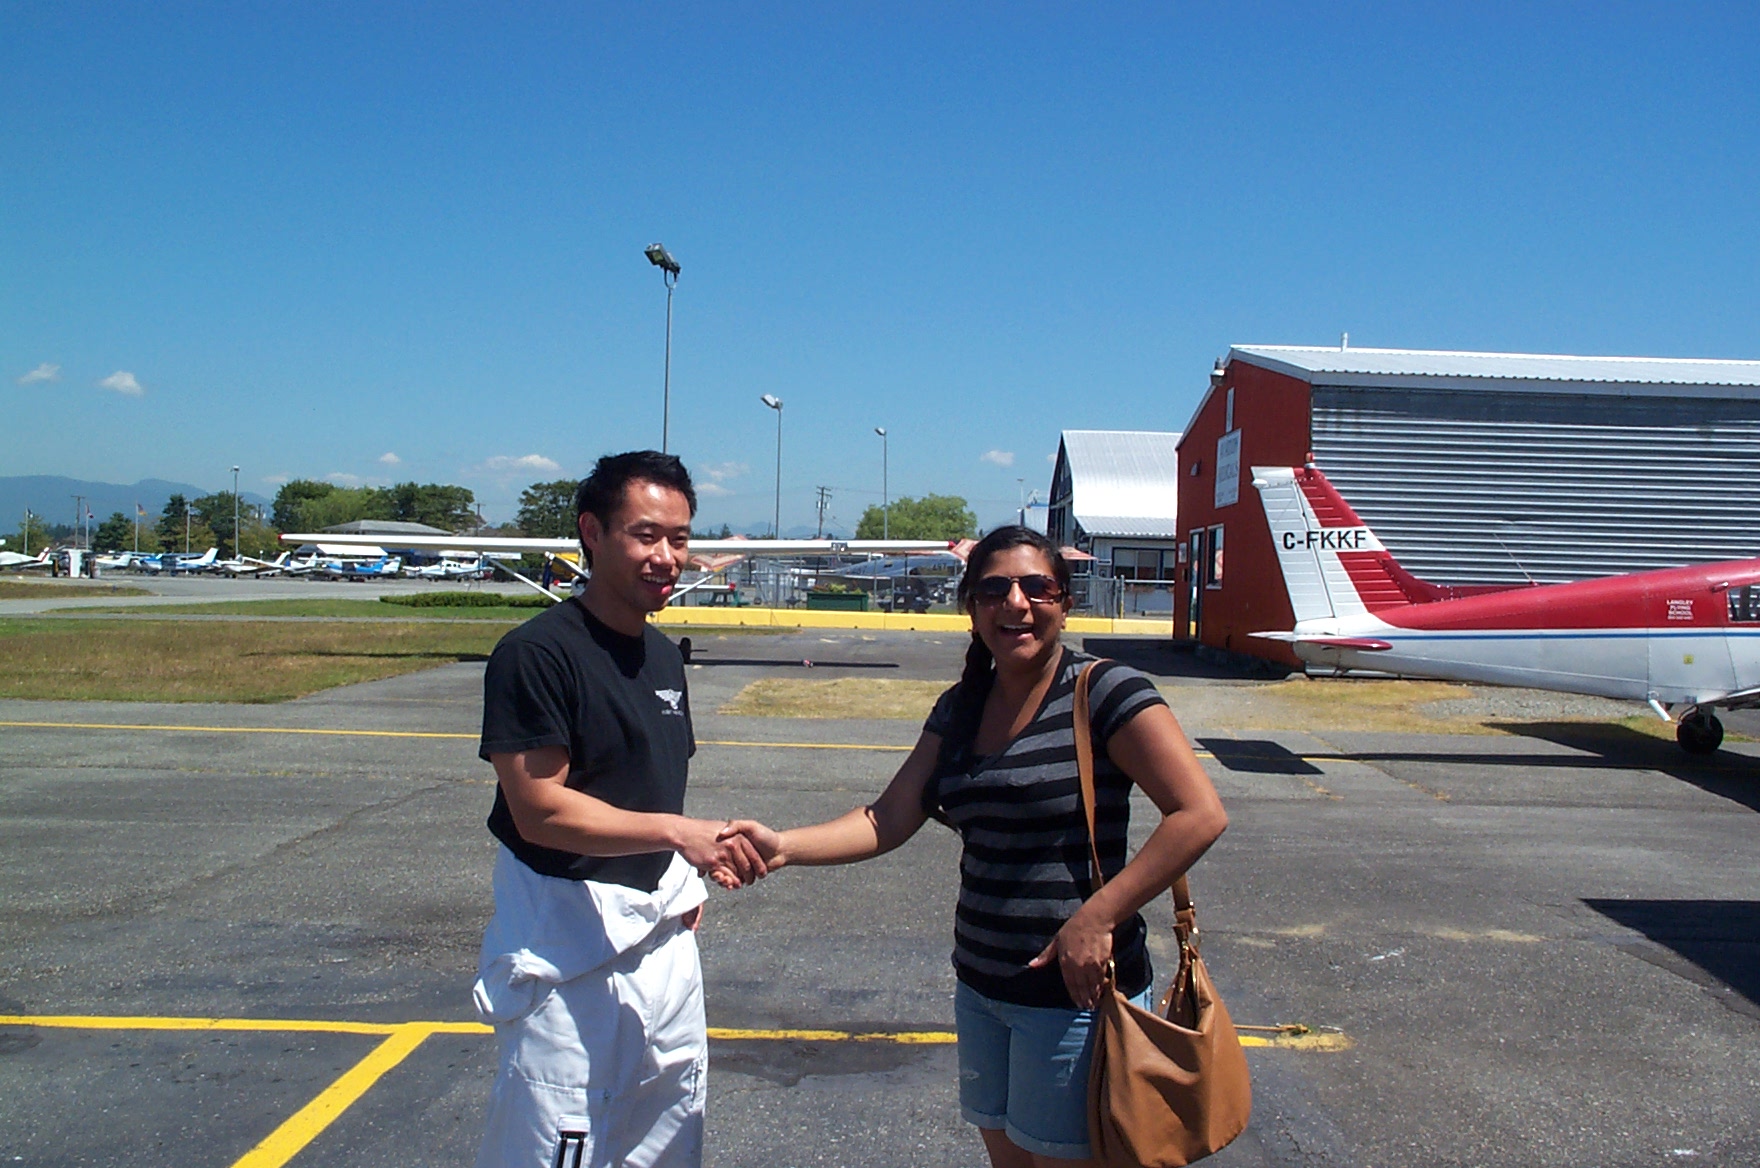 Esther Karunakar receives congratulations from her Flight Instructor Nam Hoai Vu after the completion of Esther's First Solo Flight on July 6, 2010. Langley Flying School.